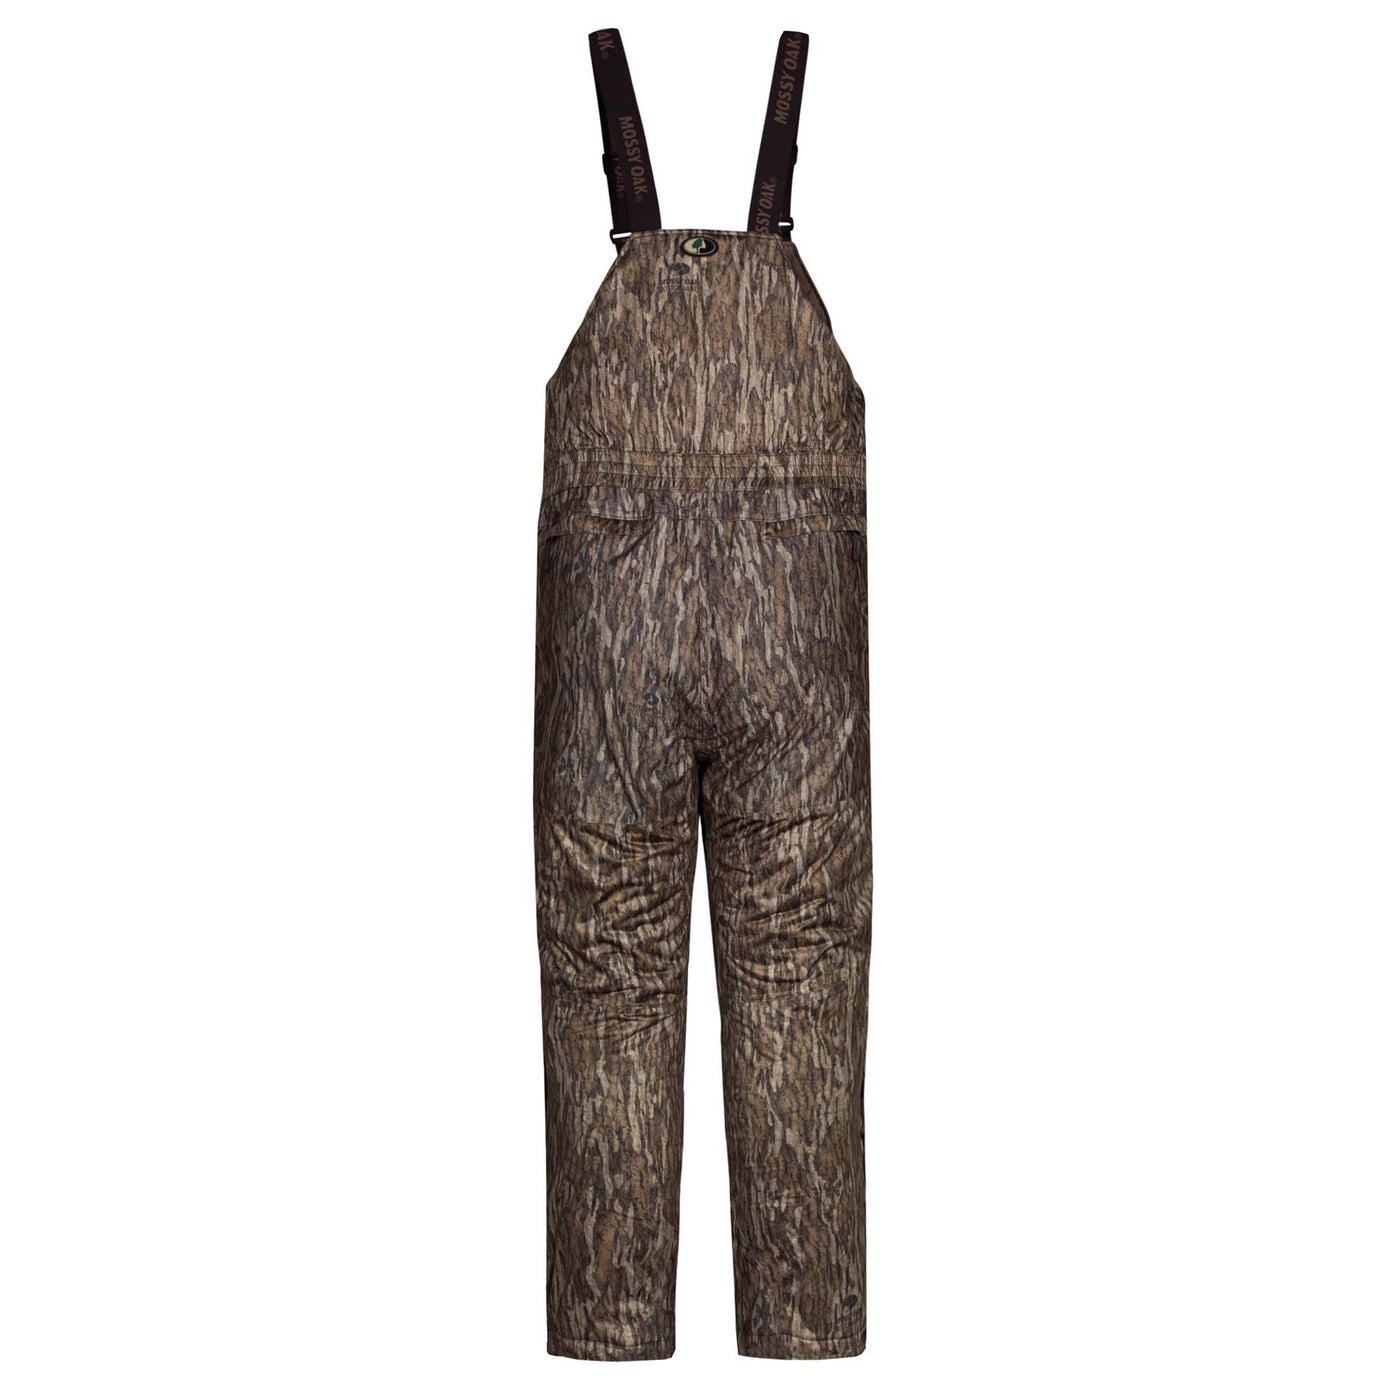 Mossy Oak Camouflage Overalls for Men